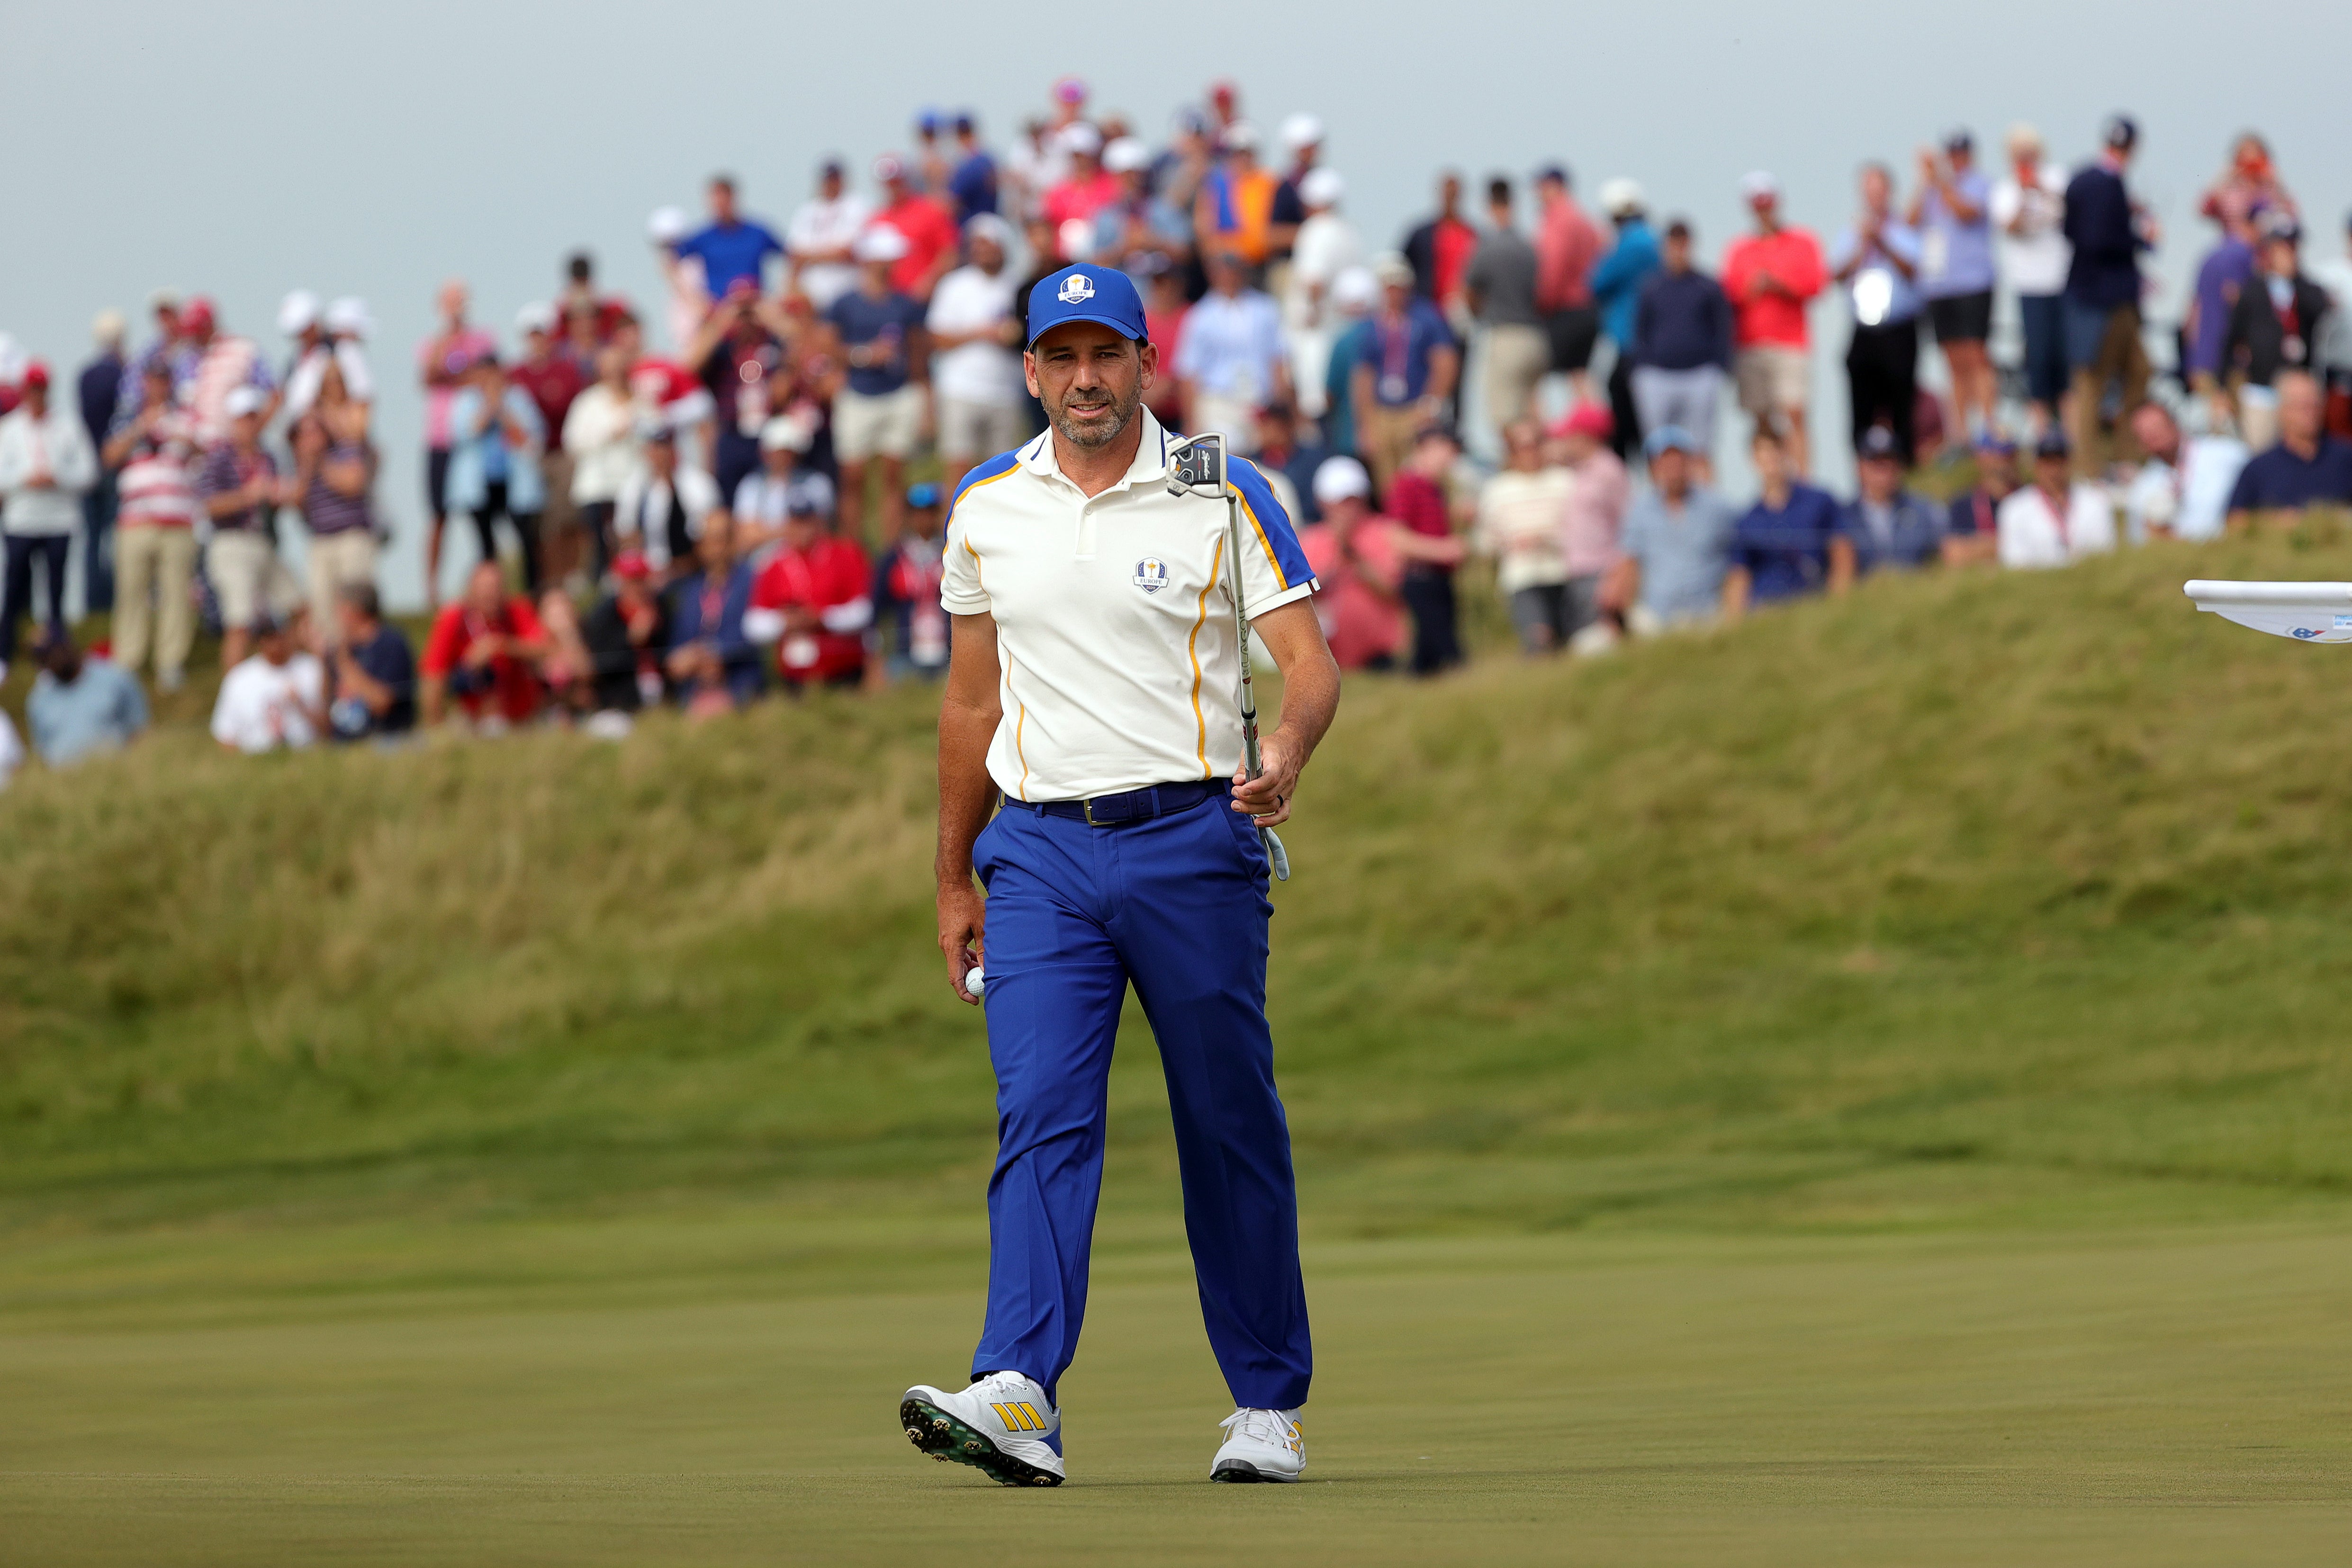 Sergio Garcia is the leading points scorer in Ryder Cup history